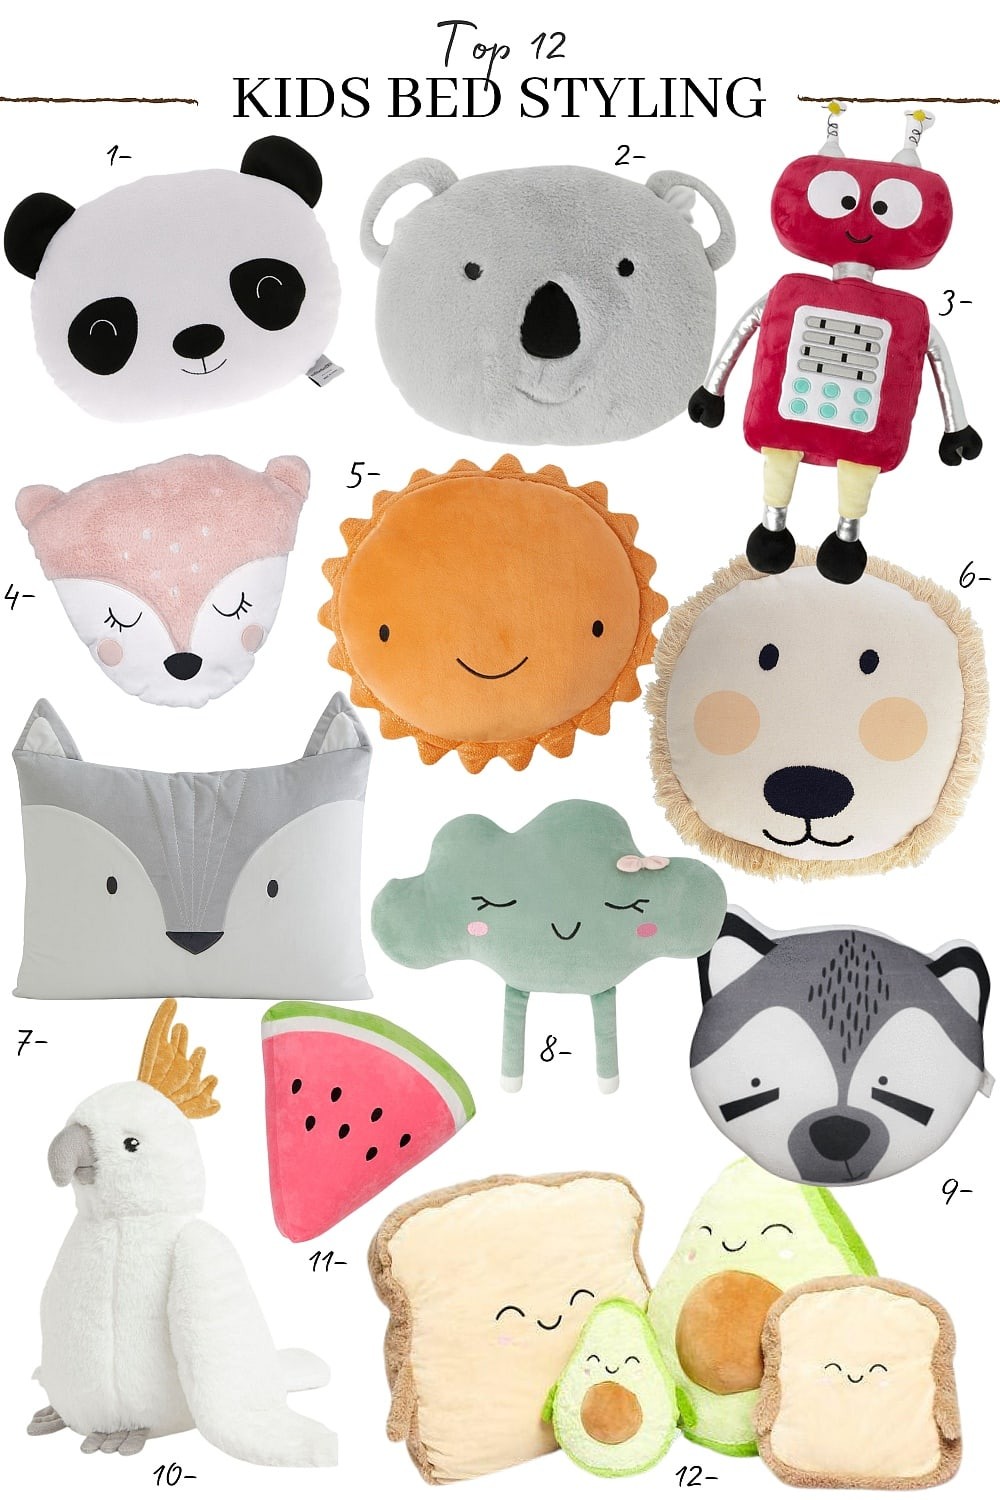 kids animal cushions for bed styling